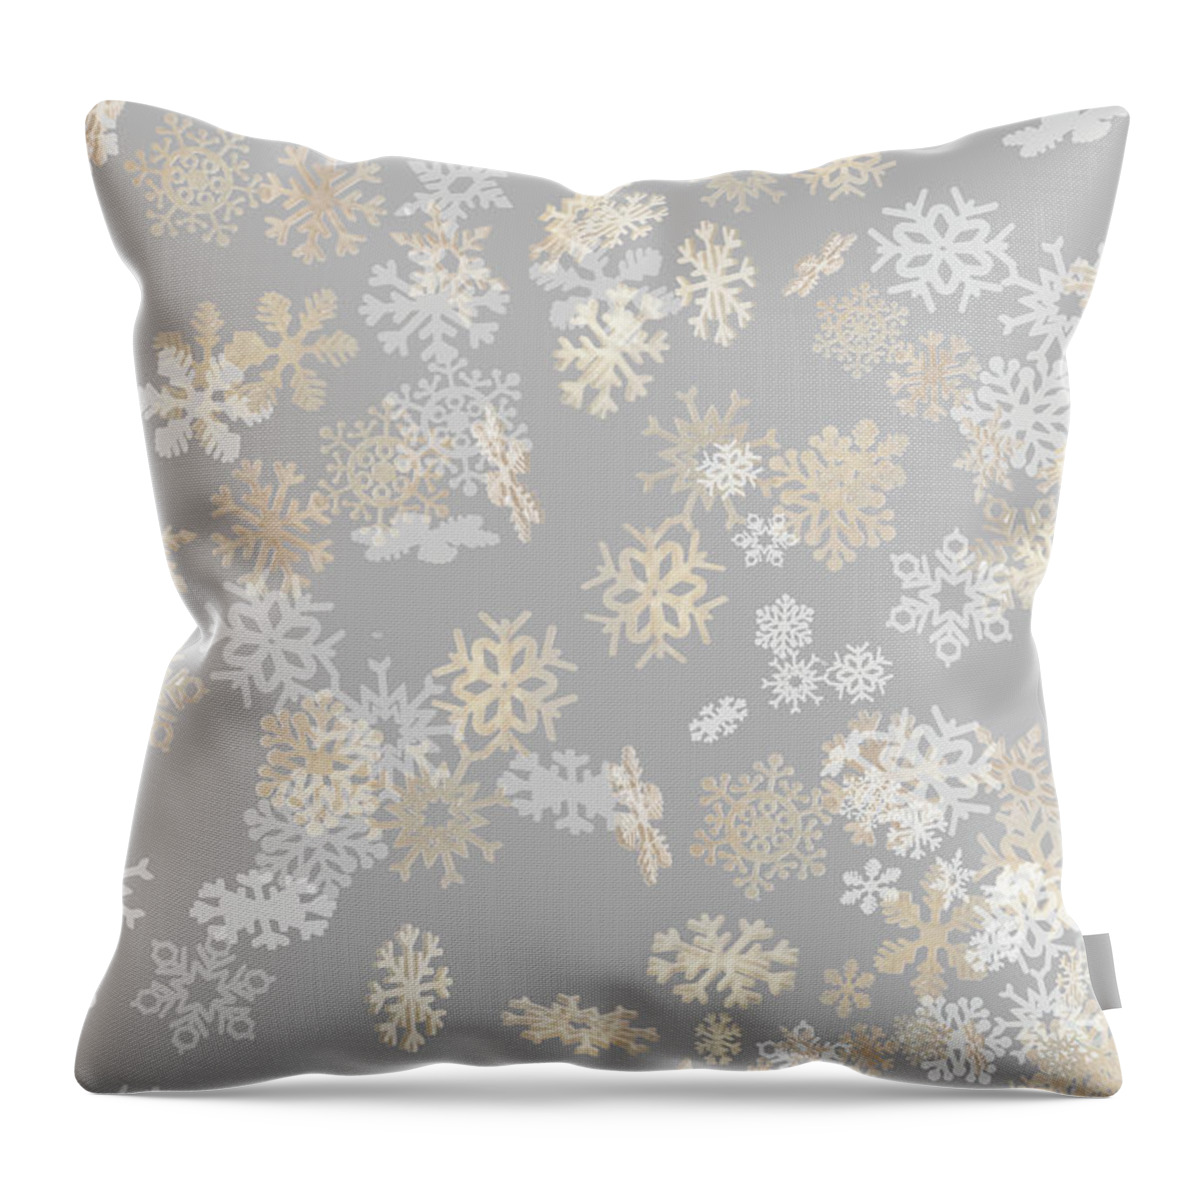 Snowflake Throw Pillow featuring the photograph Falling snowflakes pattern on grey background by Simon Bratt